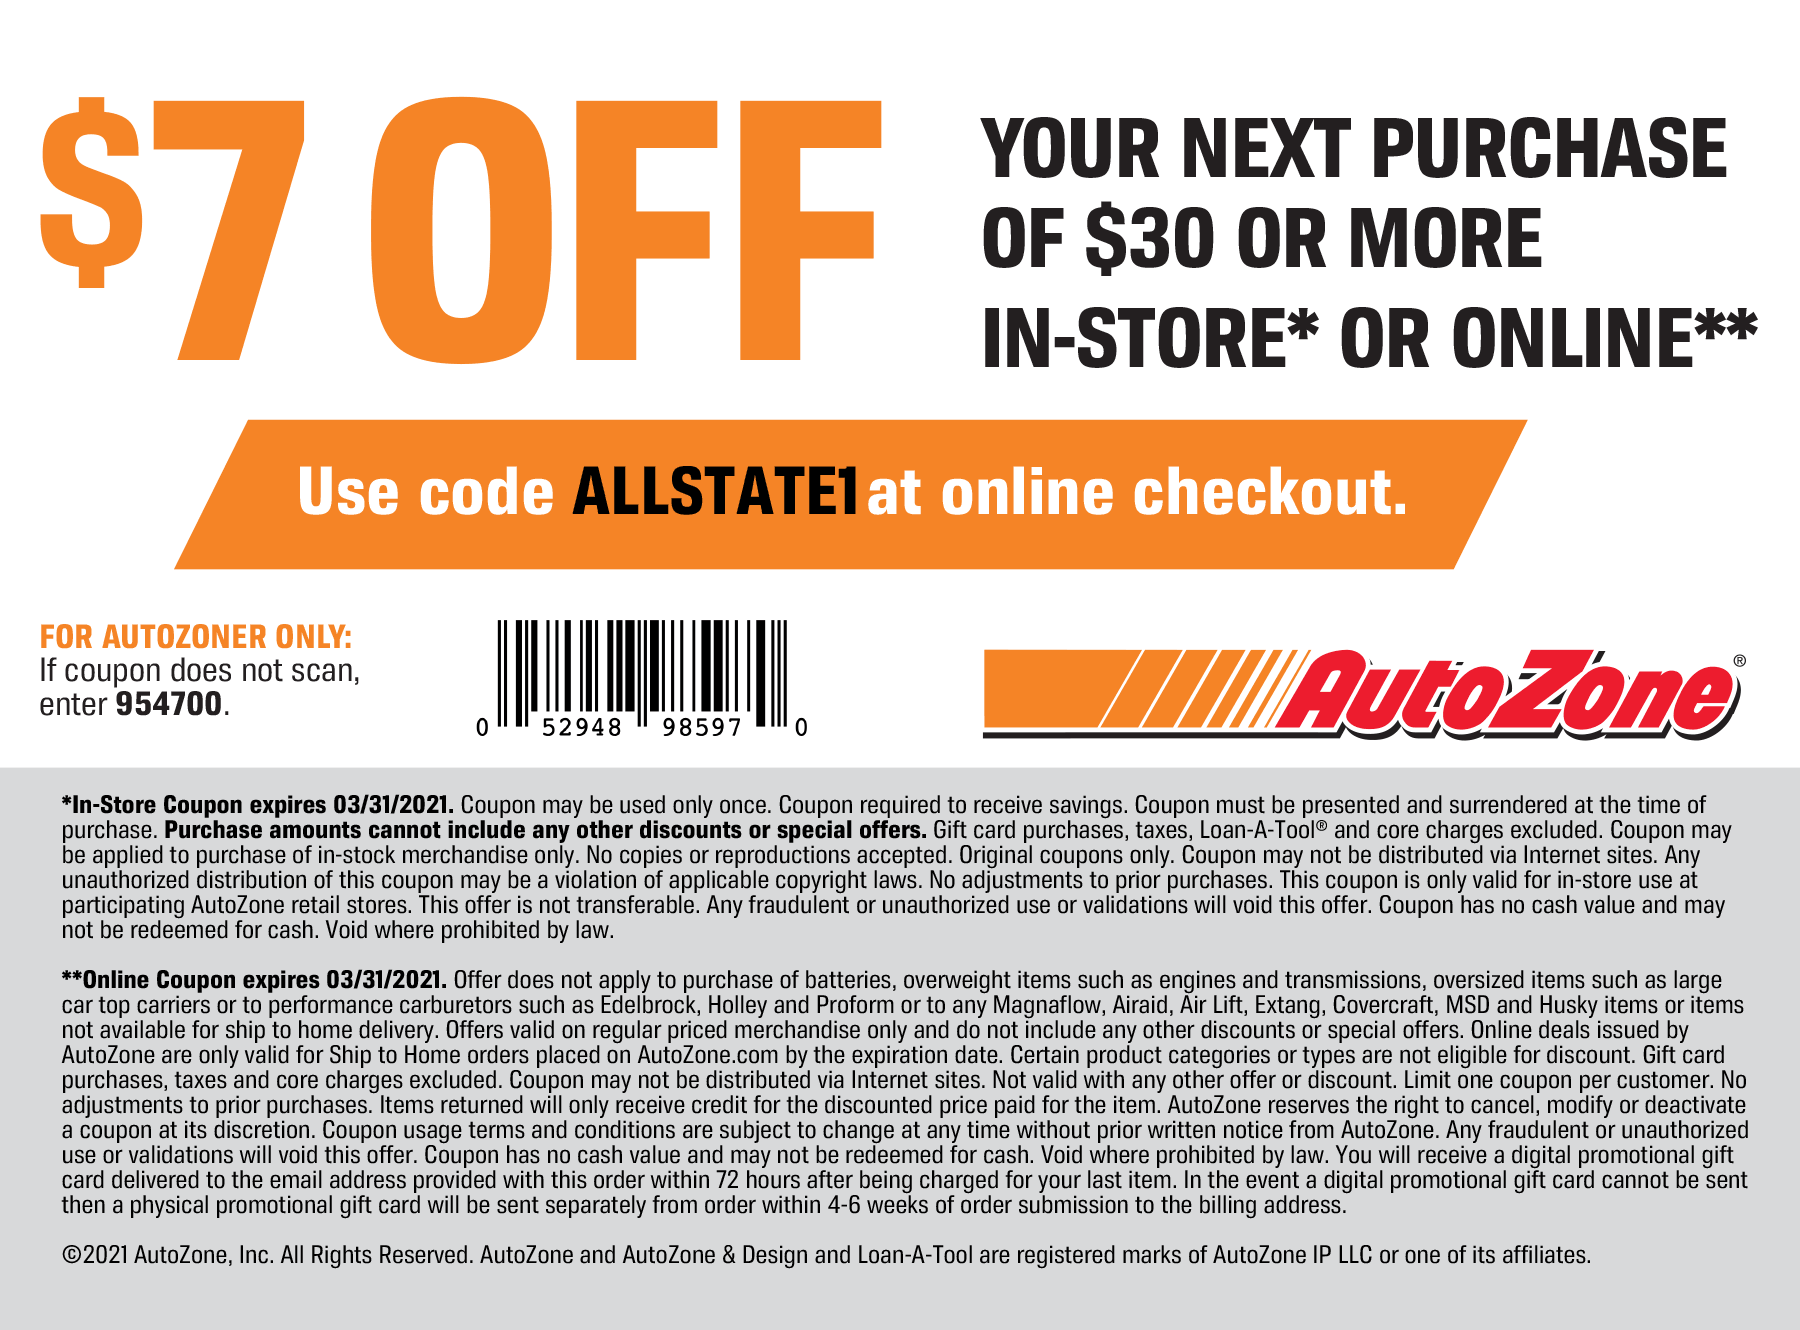 autozone-coupons-10-off-50-at-autozone-free-coupons-by-mail